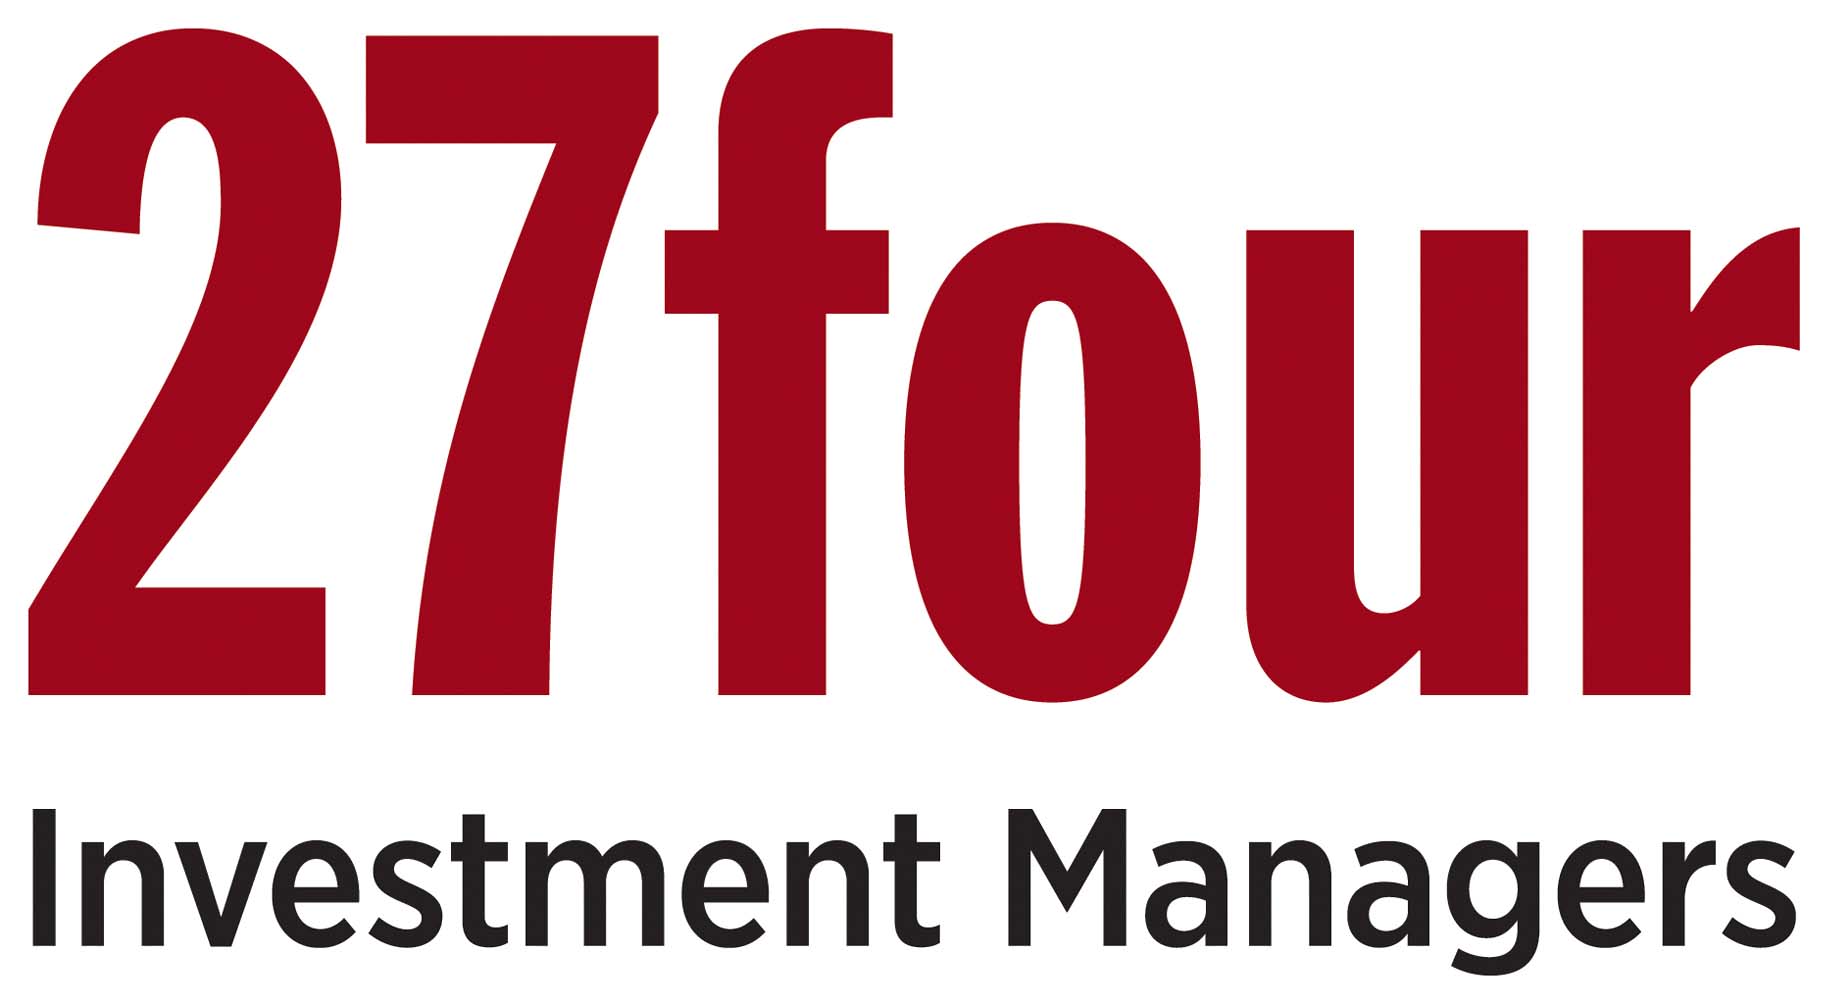 27FOUR Investment Managers